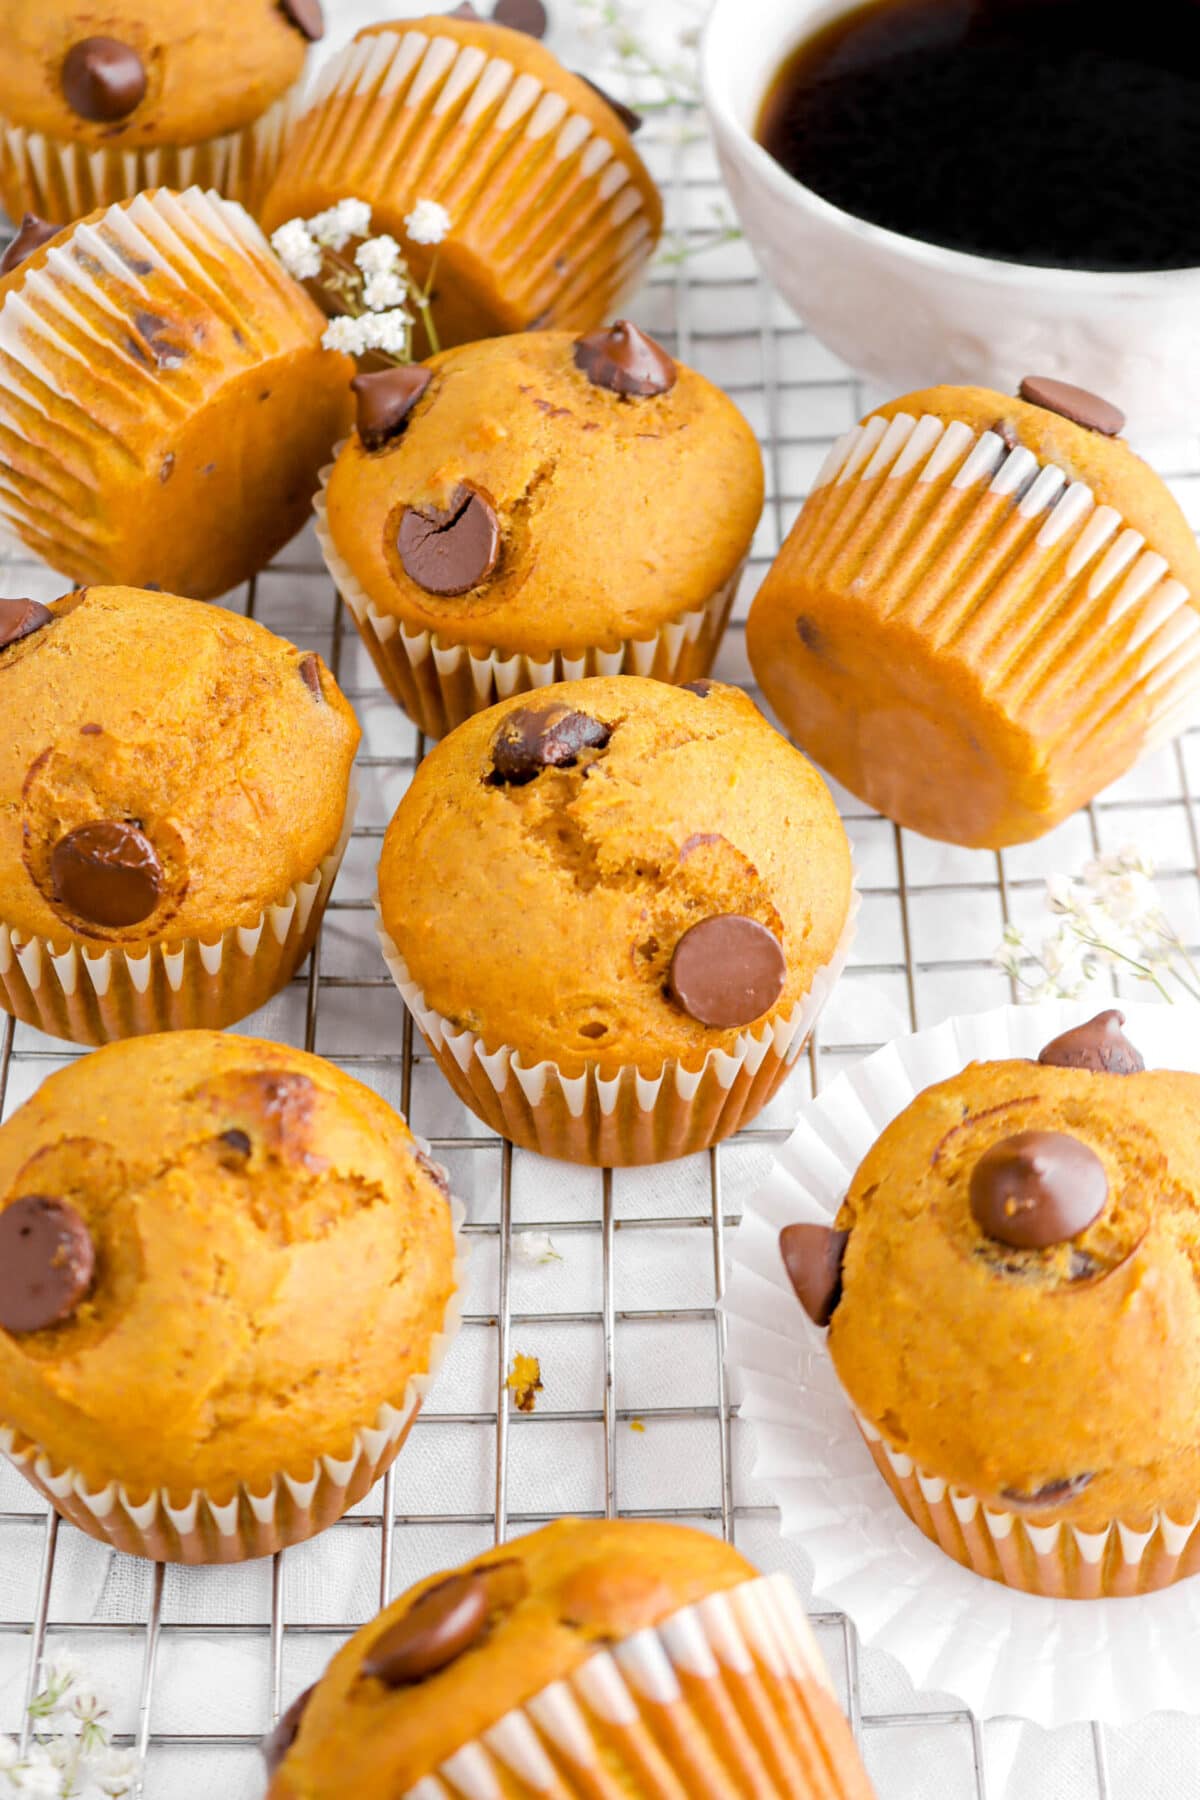 angled close up of pumpkin chocolate chip muffin with more muffins around, white flowers, and cup of coffee on wire cooling rack.